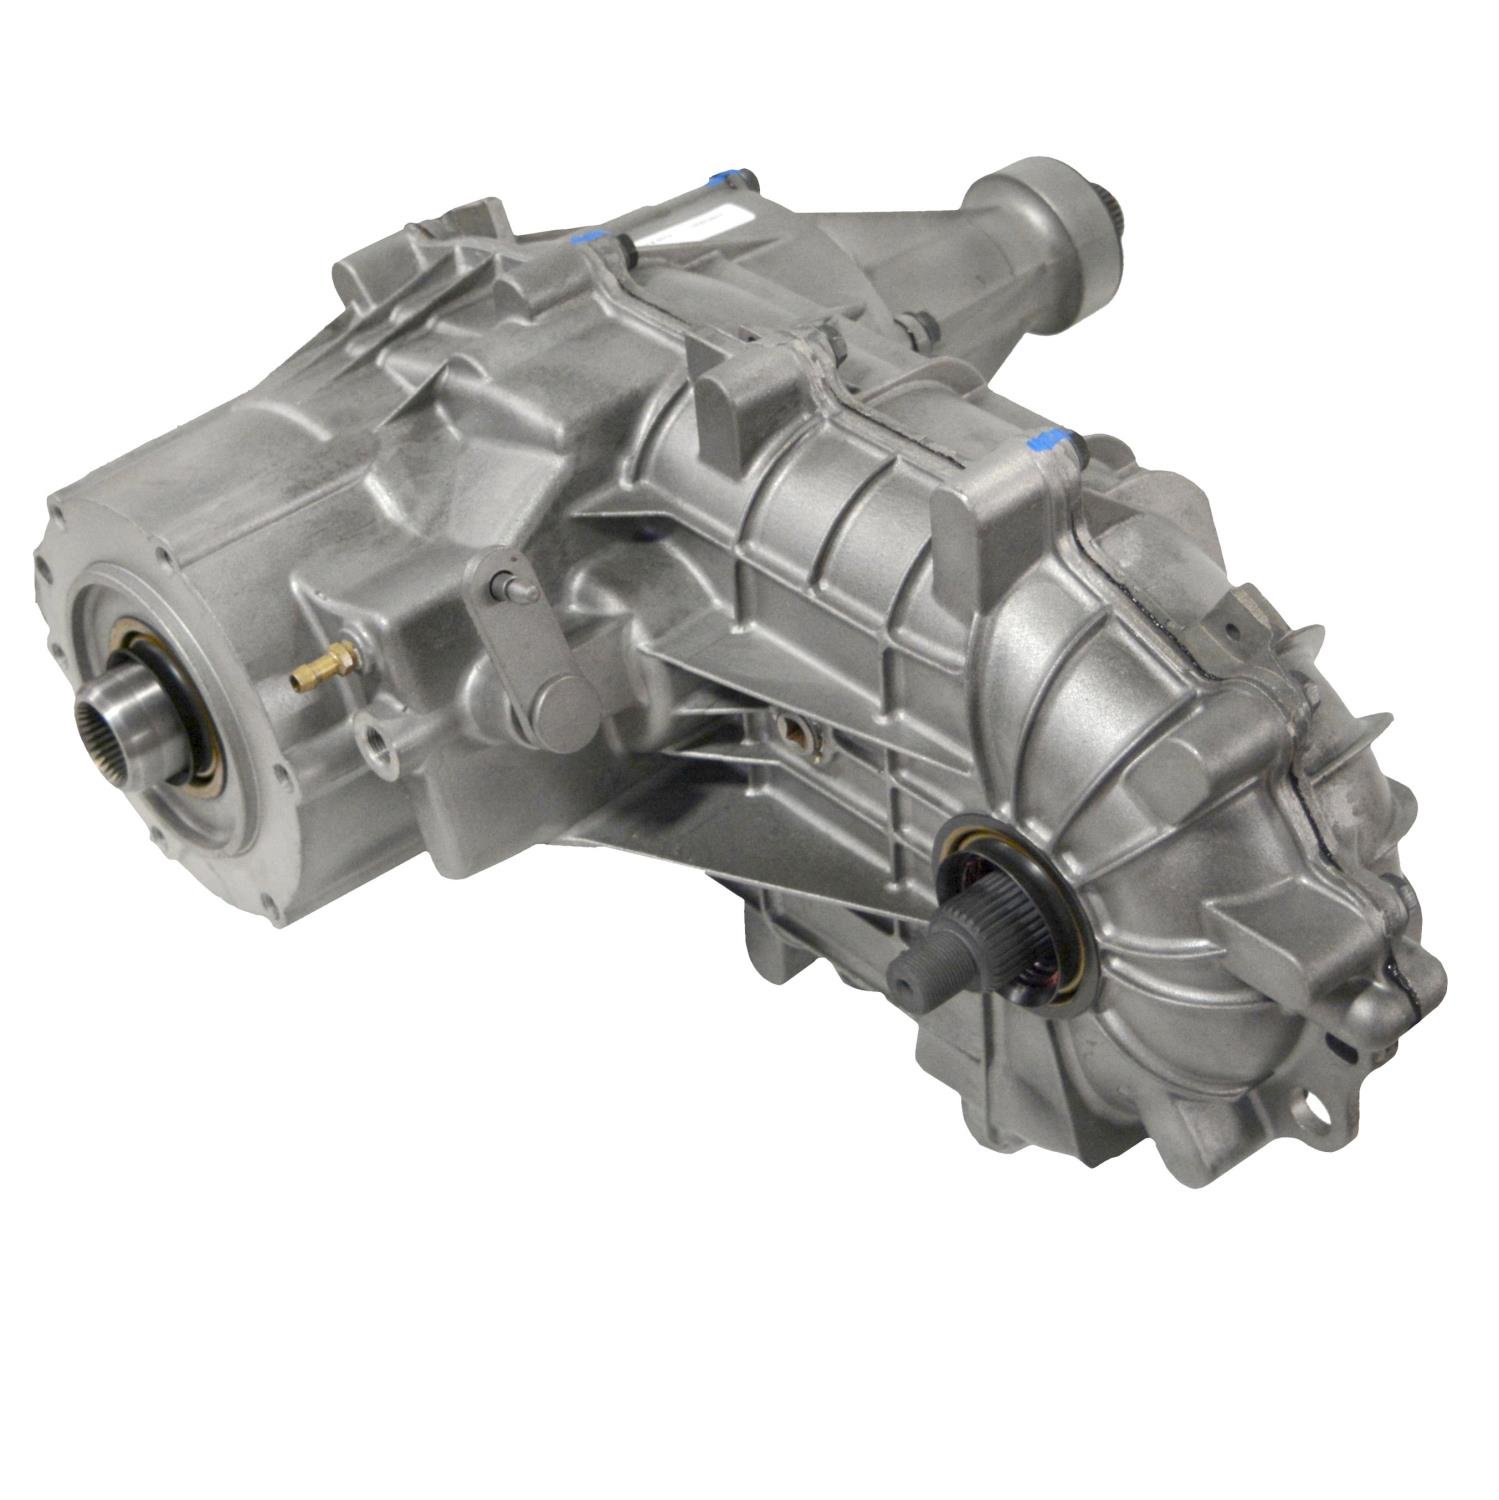 Remanufactured BW1356 Transfer Case, 1992-1997 Ford